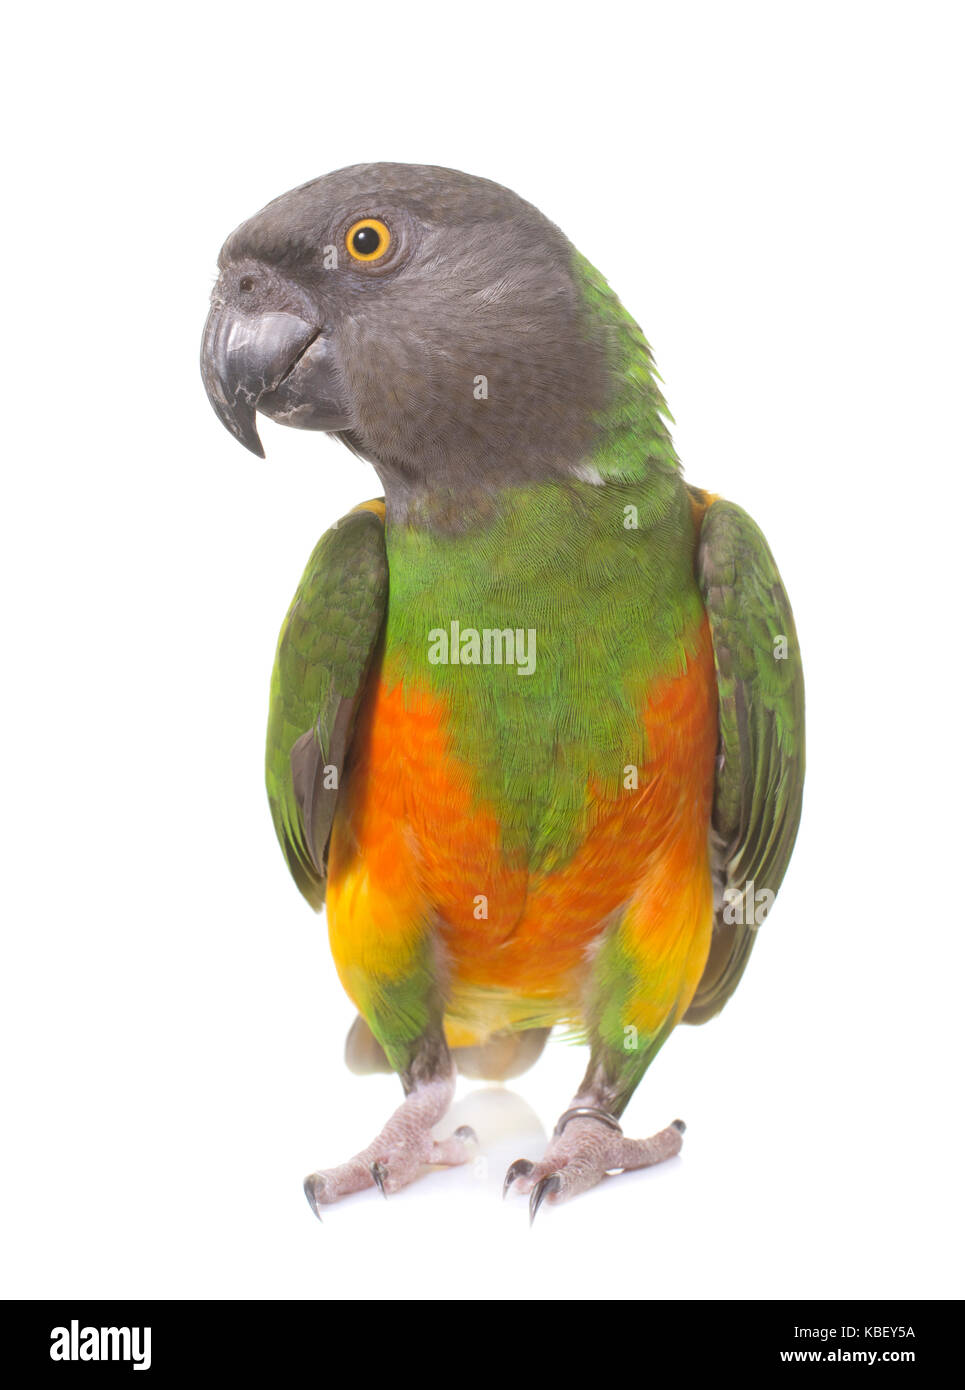 Sénégal parrot in front of white background Banque D'Images